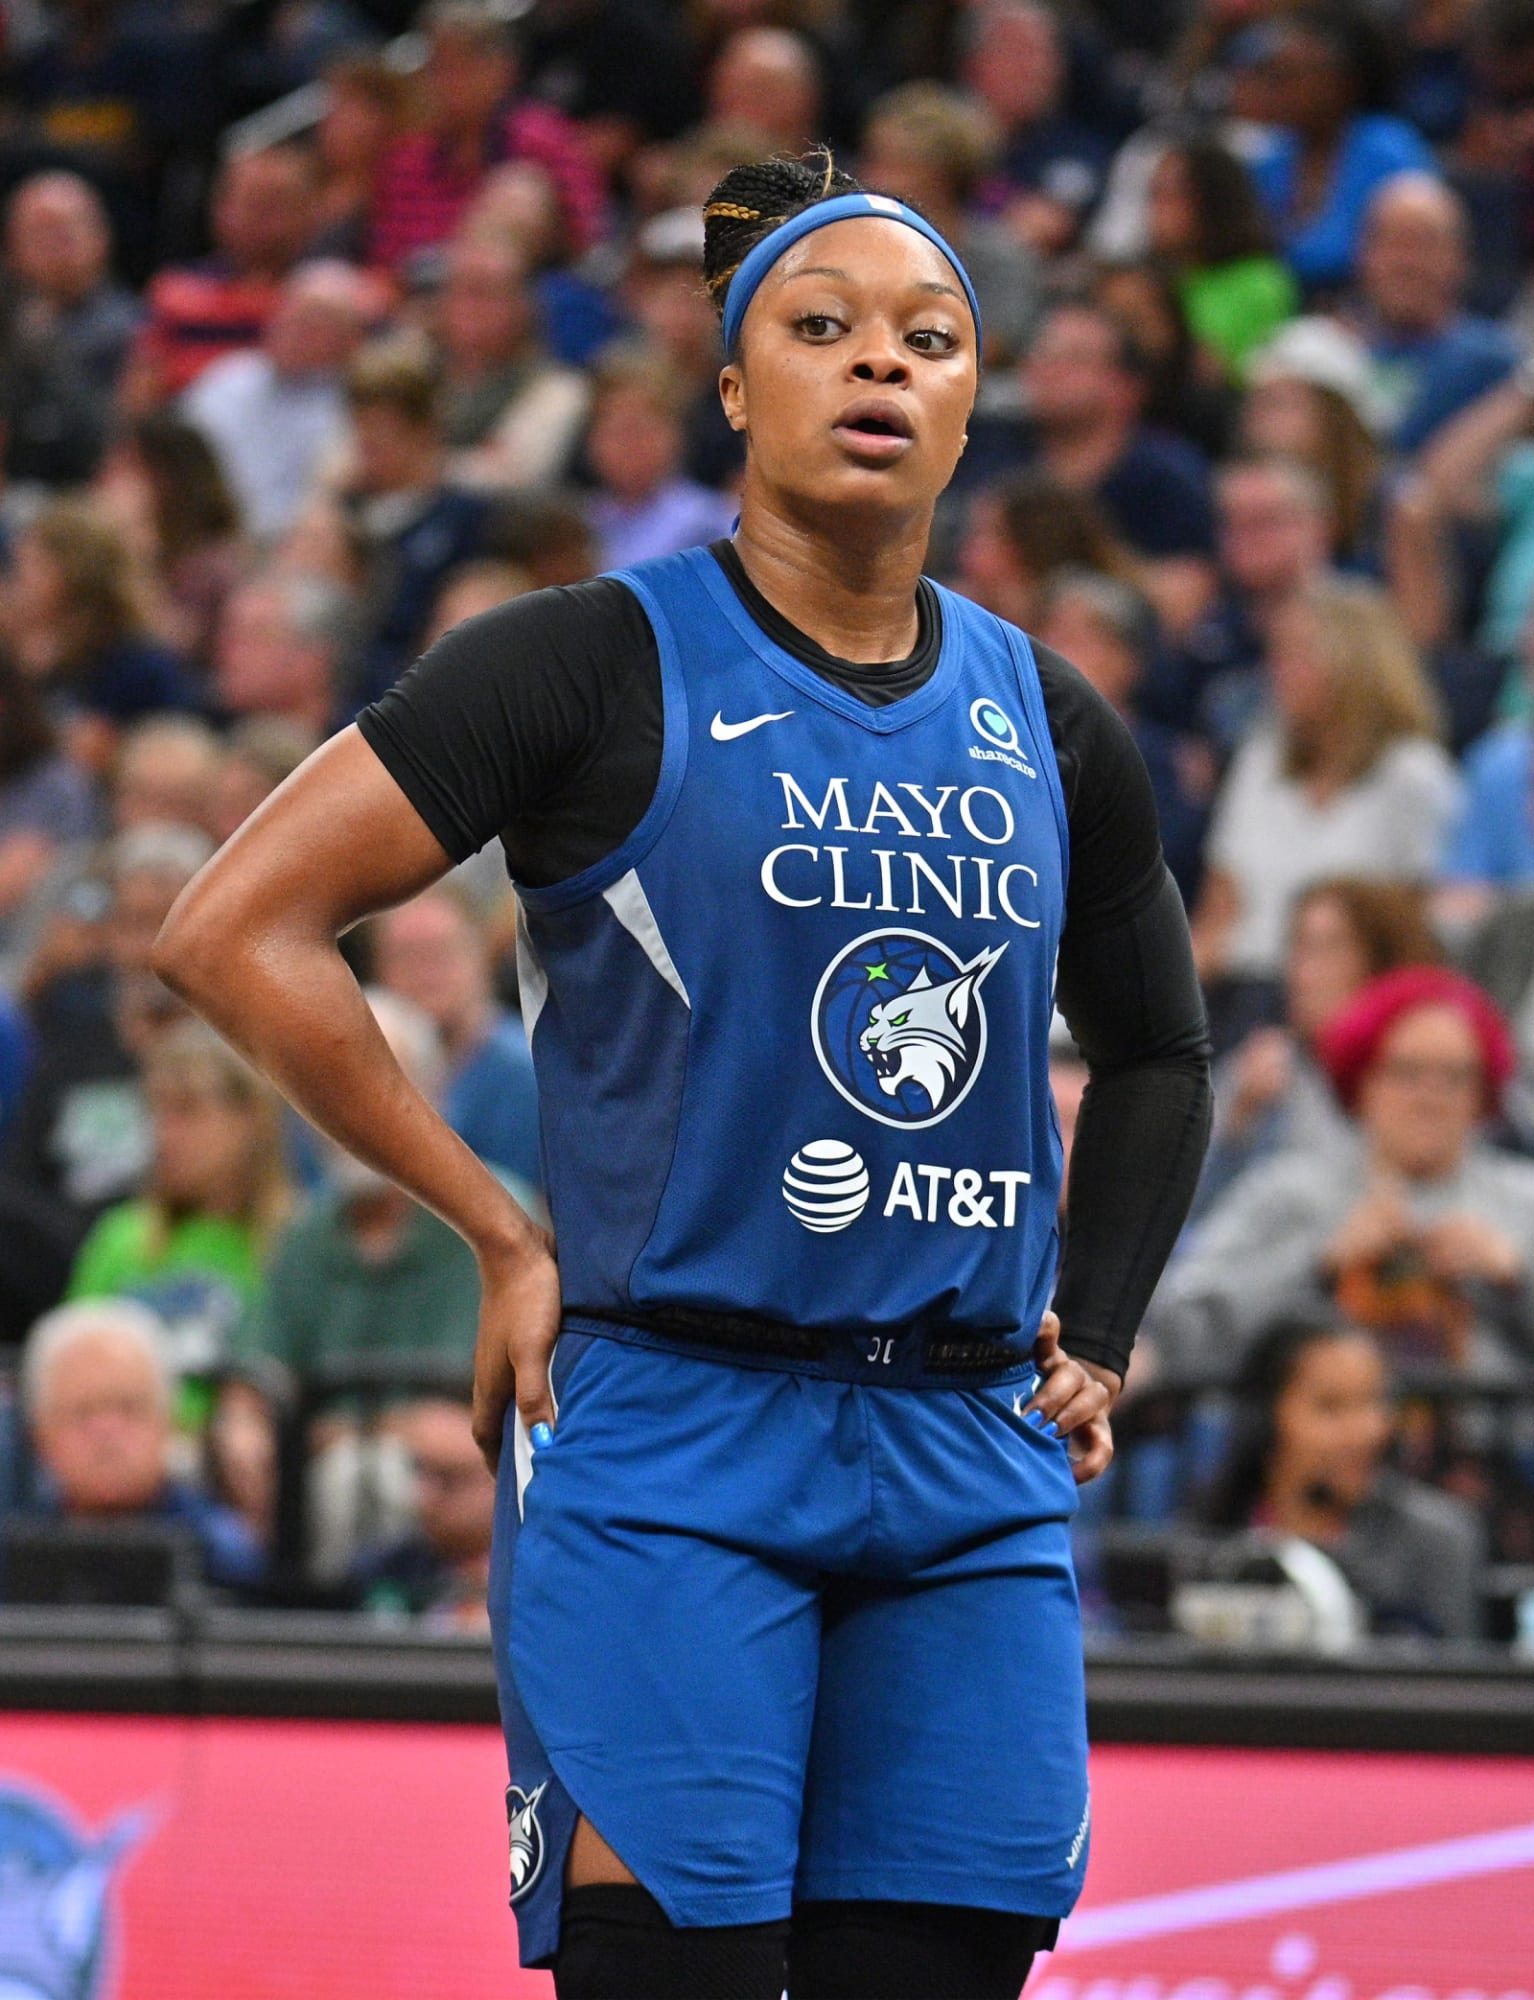 WNBA news: Odyssey Sims pleads guilty to DWI charges